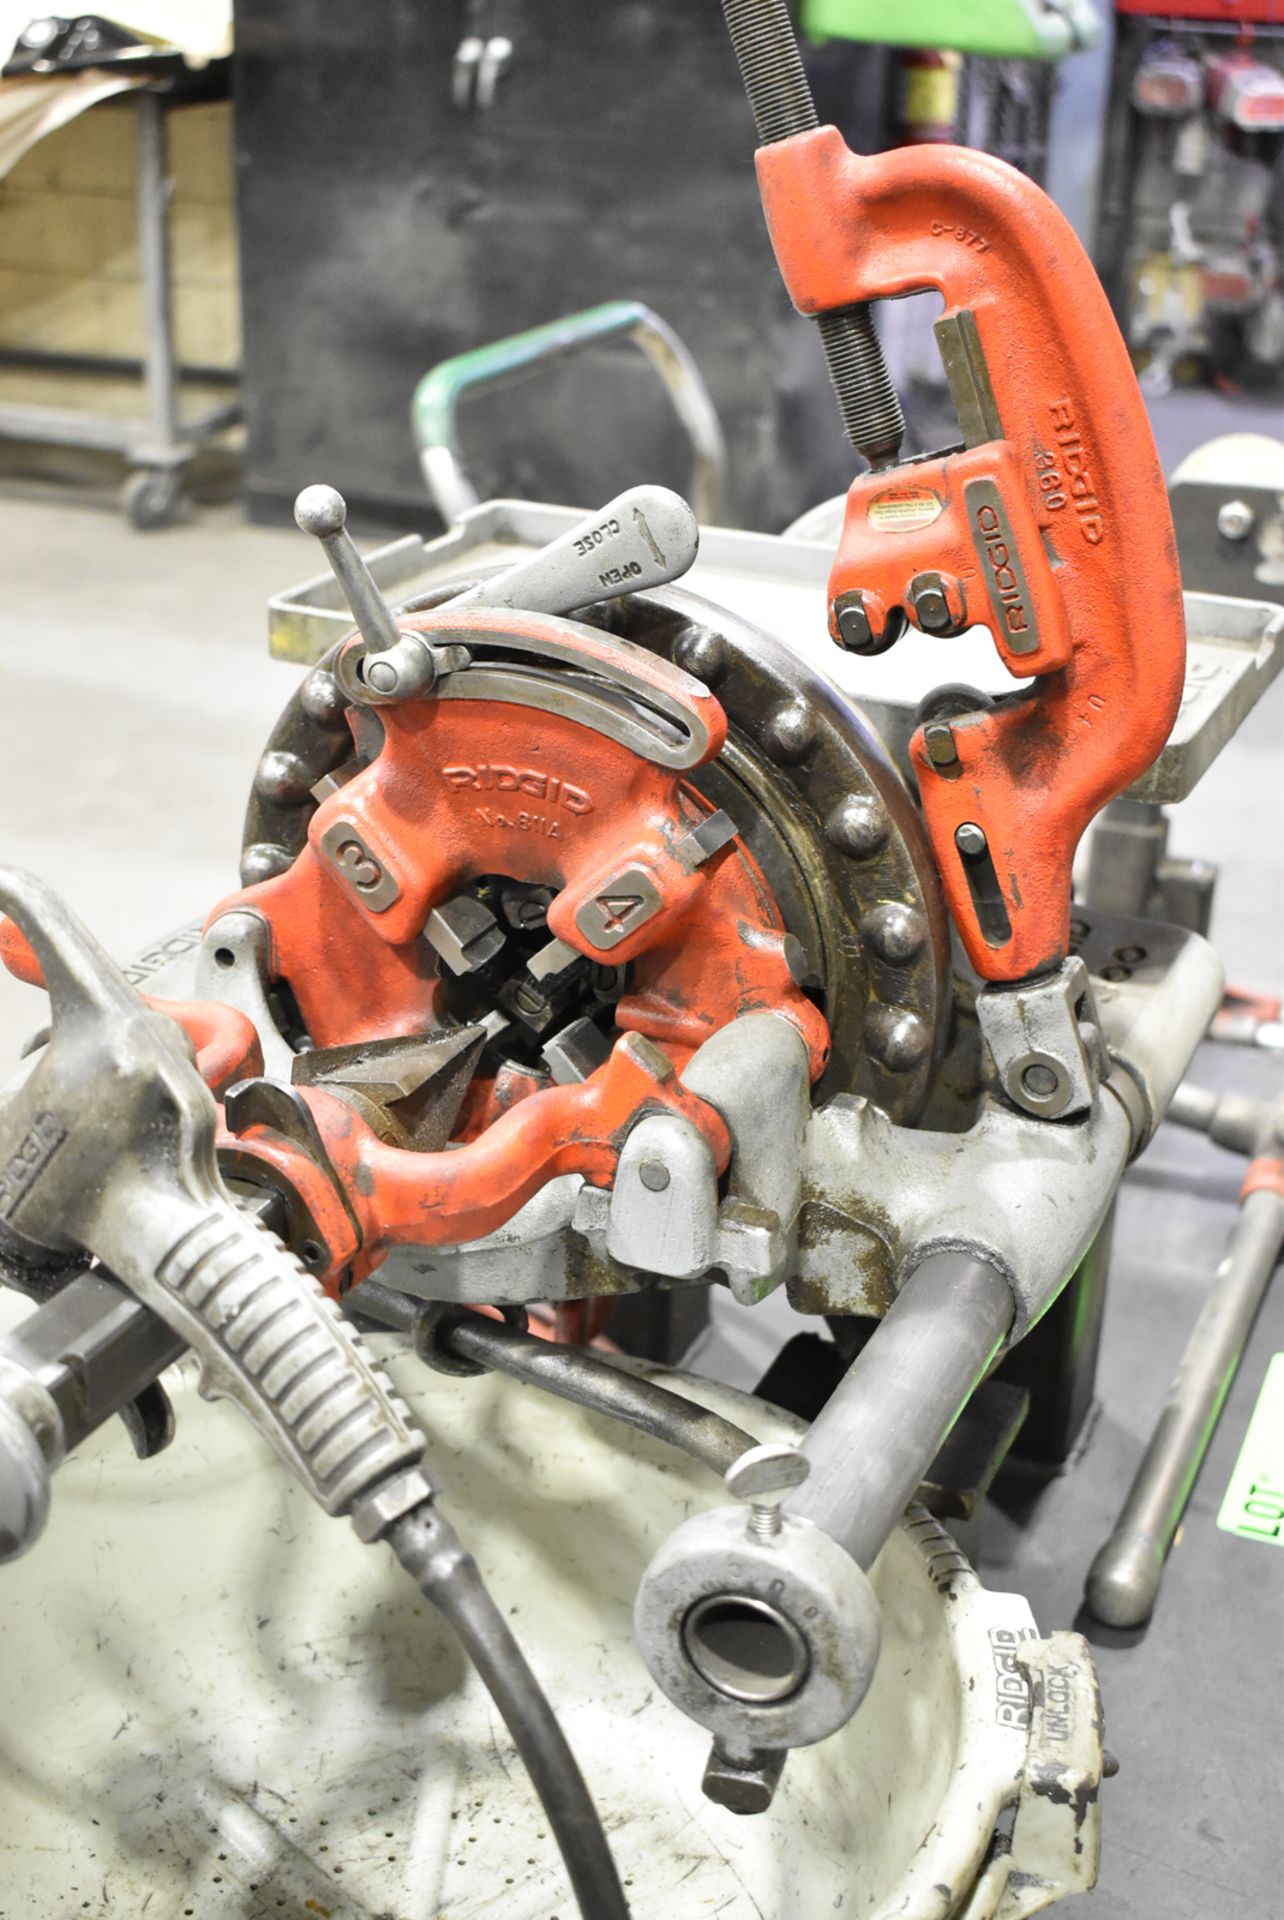 RIDGID 300 POWERED PIPE AND BOLT THREADER WITH DIE HOLDER, REAMER AND CUTTING ATTACHMENTS, - Image 2 of 3